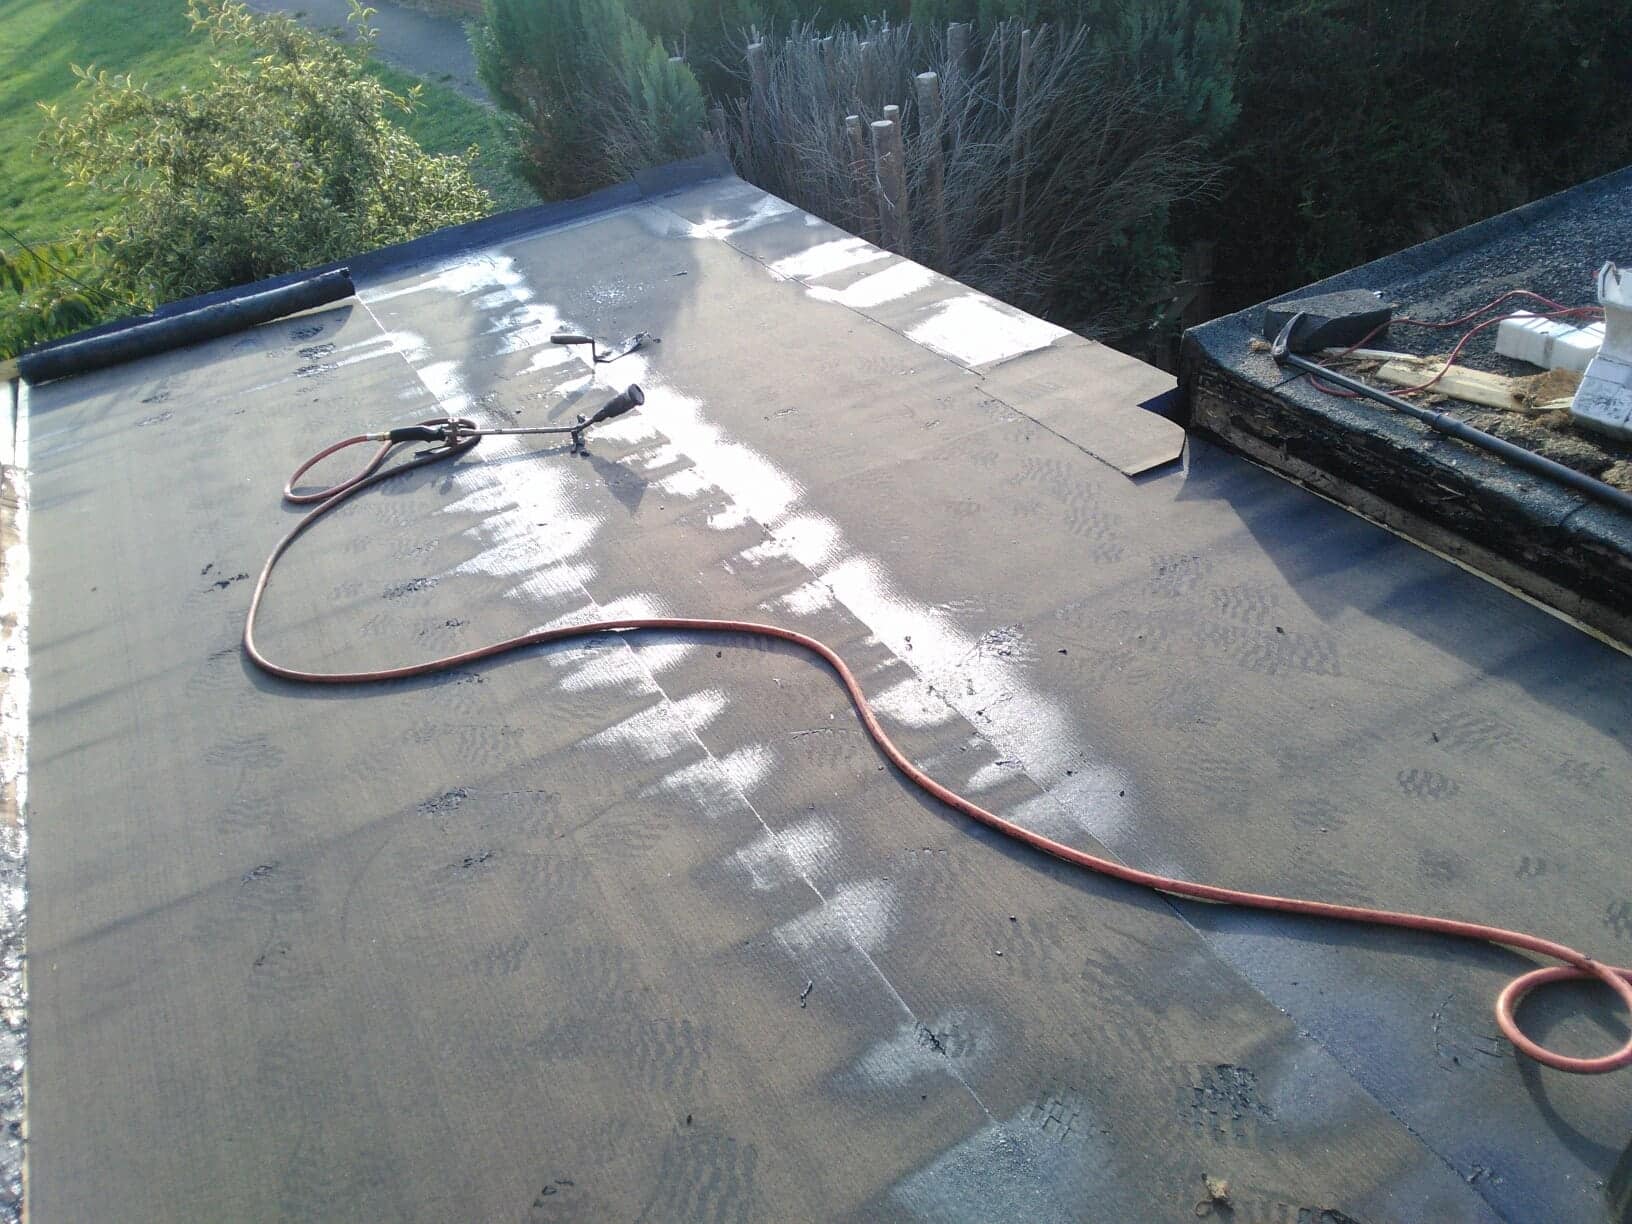 Images First 4 Roofing